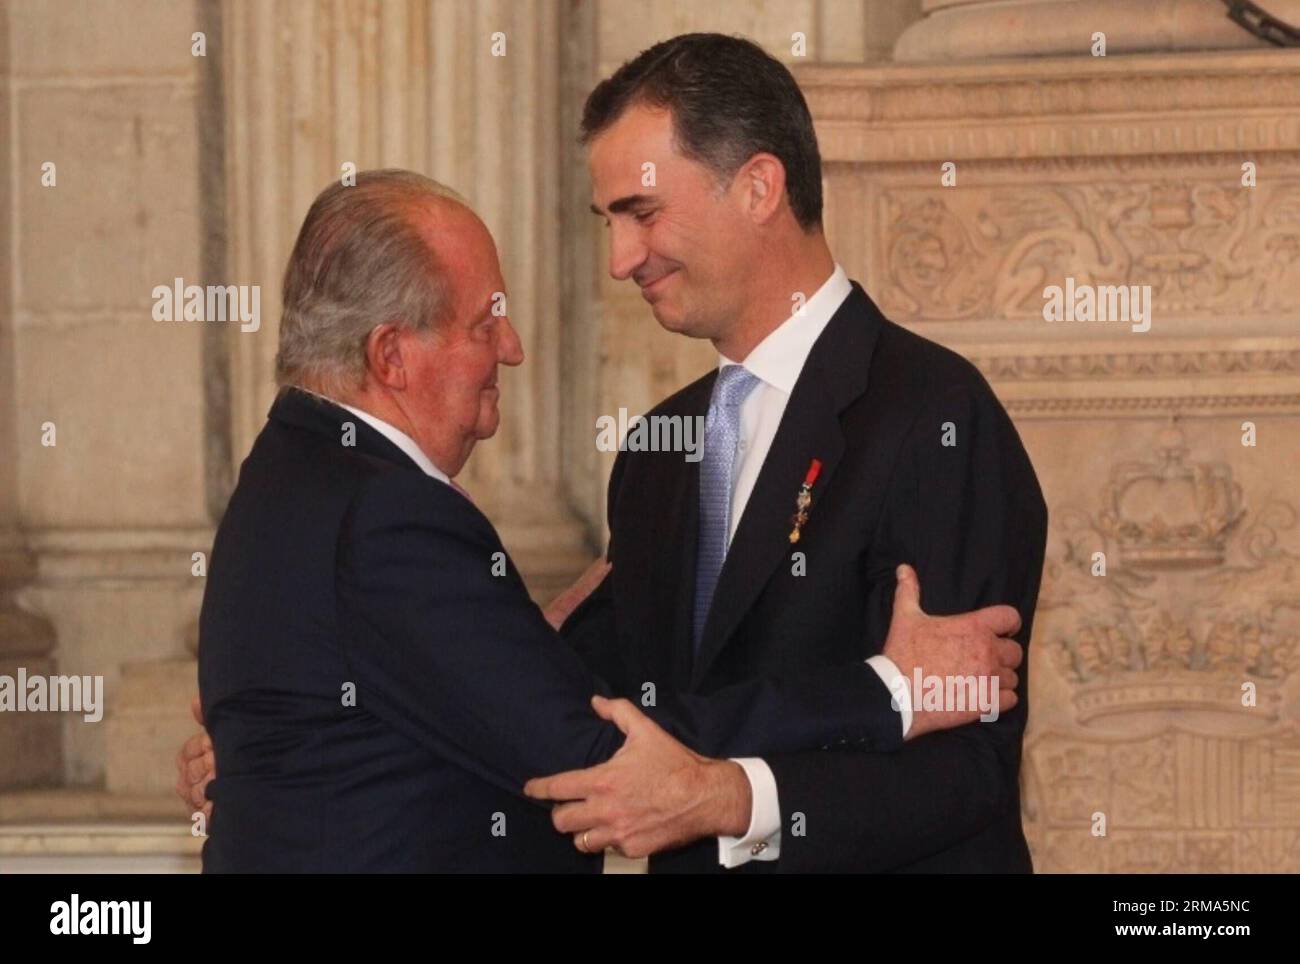 The King Juan Carlos I de Borbon (L) of Spain embraces his son Felipe de Borbon after signing the law on his abdication at the Royal Palace of Madrid in Madrid, June 18, 2014. The King signed on Wednesday the law on his abdication in order to give the crown to his son Felipe de Borbon, who will be King of Spain at Wednesday midnight. (Xinhua) SPAIN-MADRID-KING-ABDICATION BILL-SIGNMENT PUBLICATIONxNOTxINxCHN   The King Juan Carlos I de Borbon l of Spain embraces His Sun Felipe de Borbon After Signing The Law ON His abdication AT The Royal Palace of Madrid in Madrid June 18 2014 The King signed Stock Photo